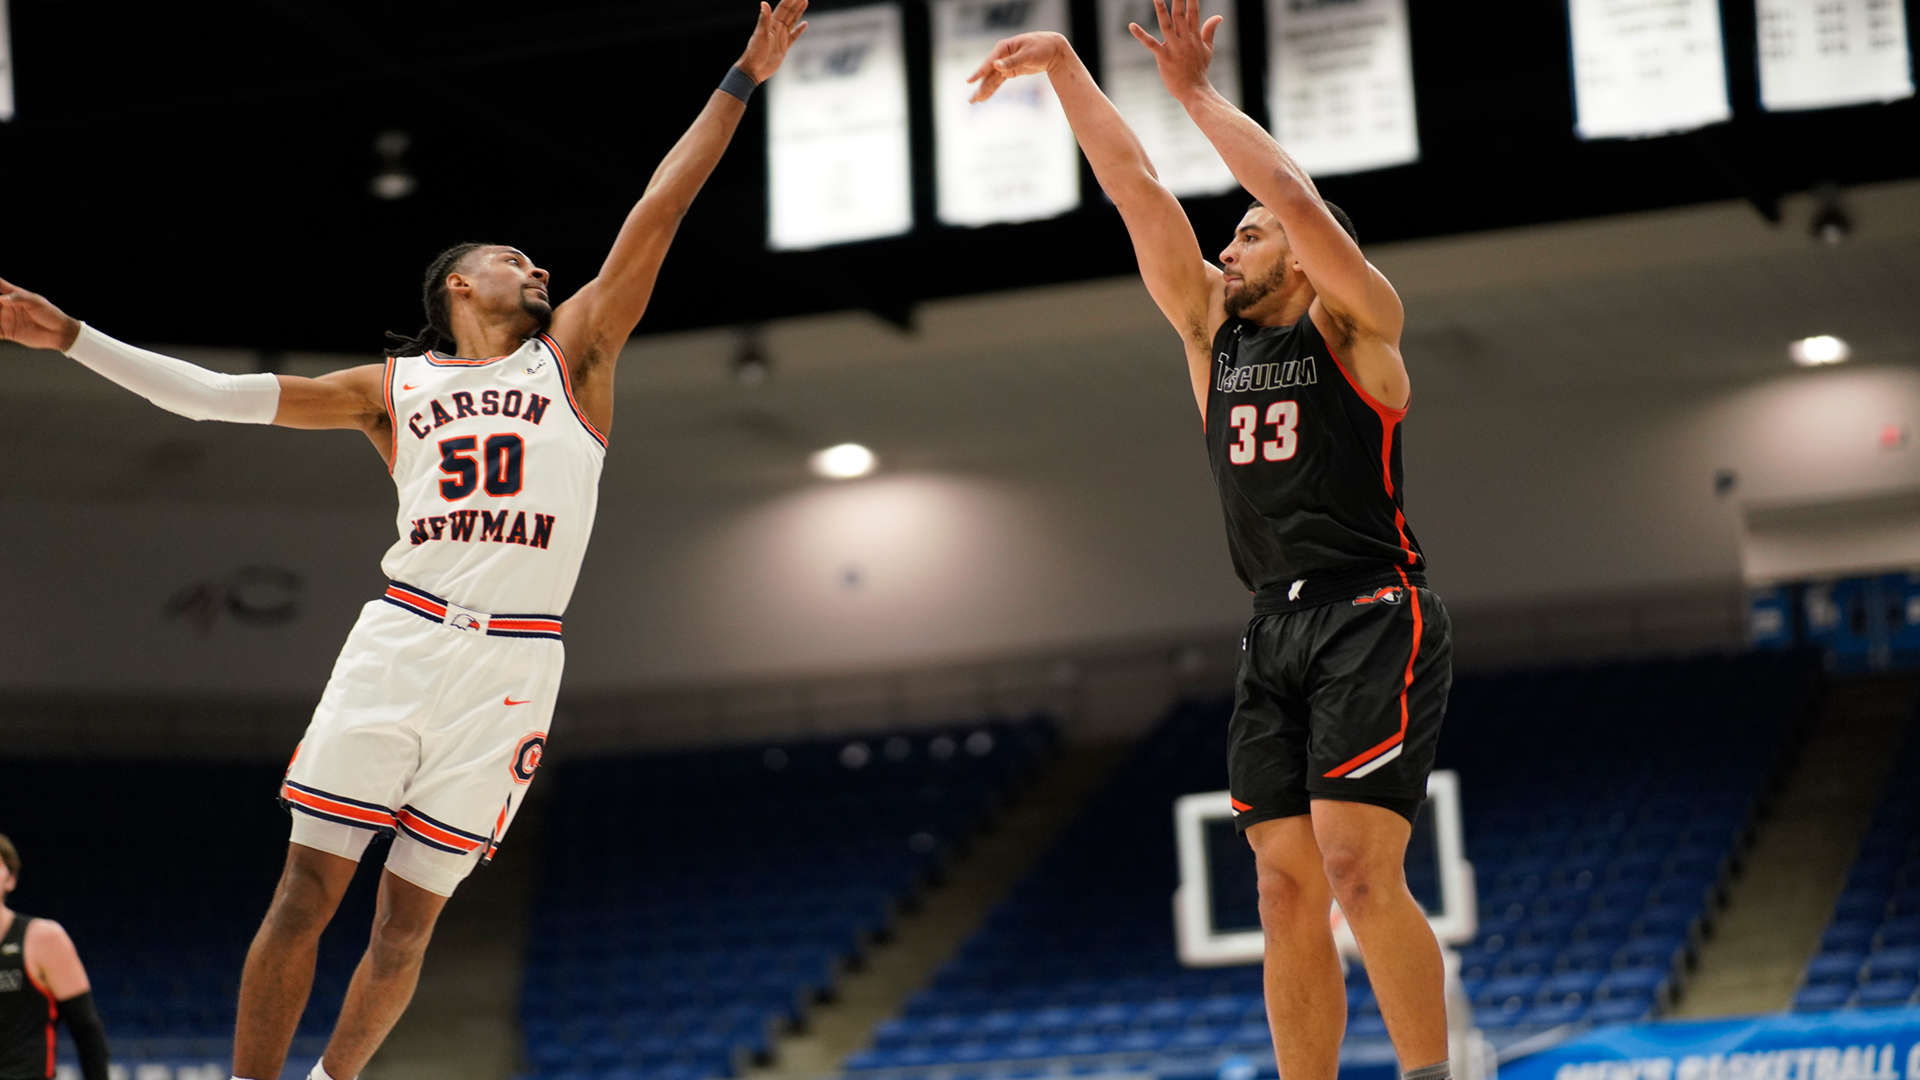 Trenton Gibson scored 22 points in Tusculum's 65-63 overtime win over Carson-Newman in the NCAA Southeast Region quarterfinal (photo by Danny Vaughn)